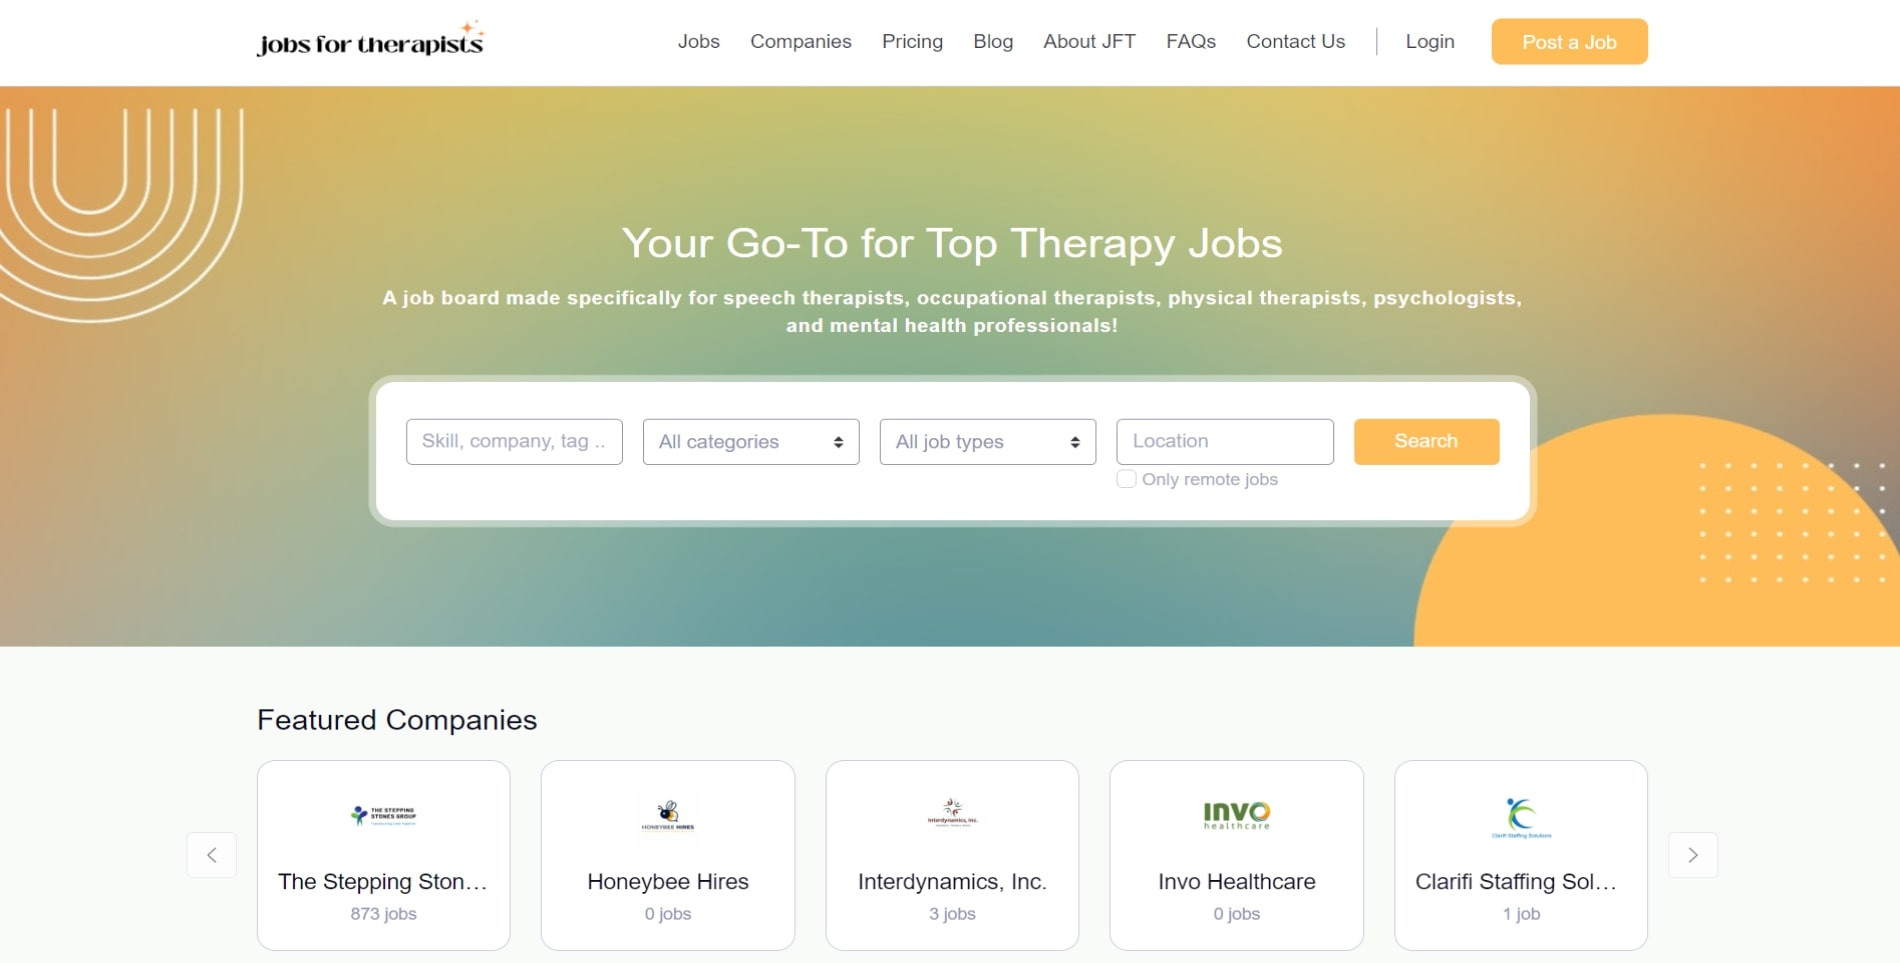 Jobs For Therapists